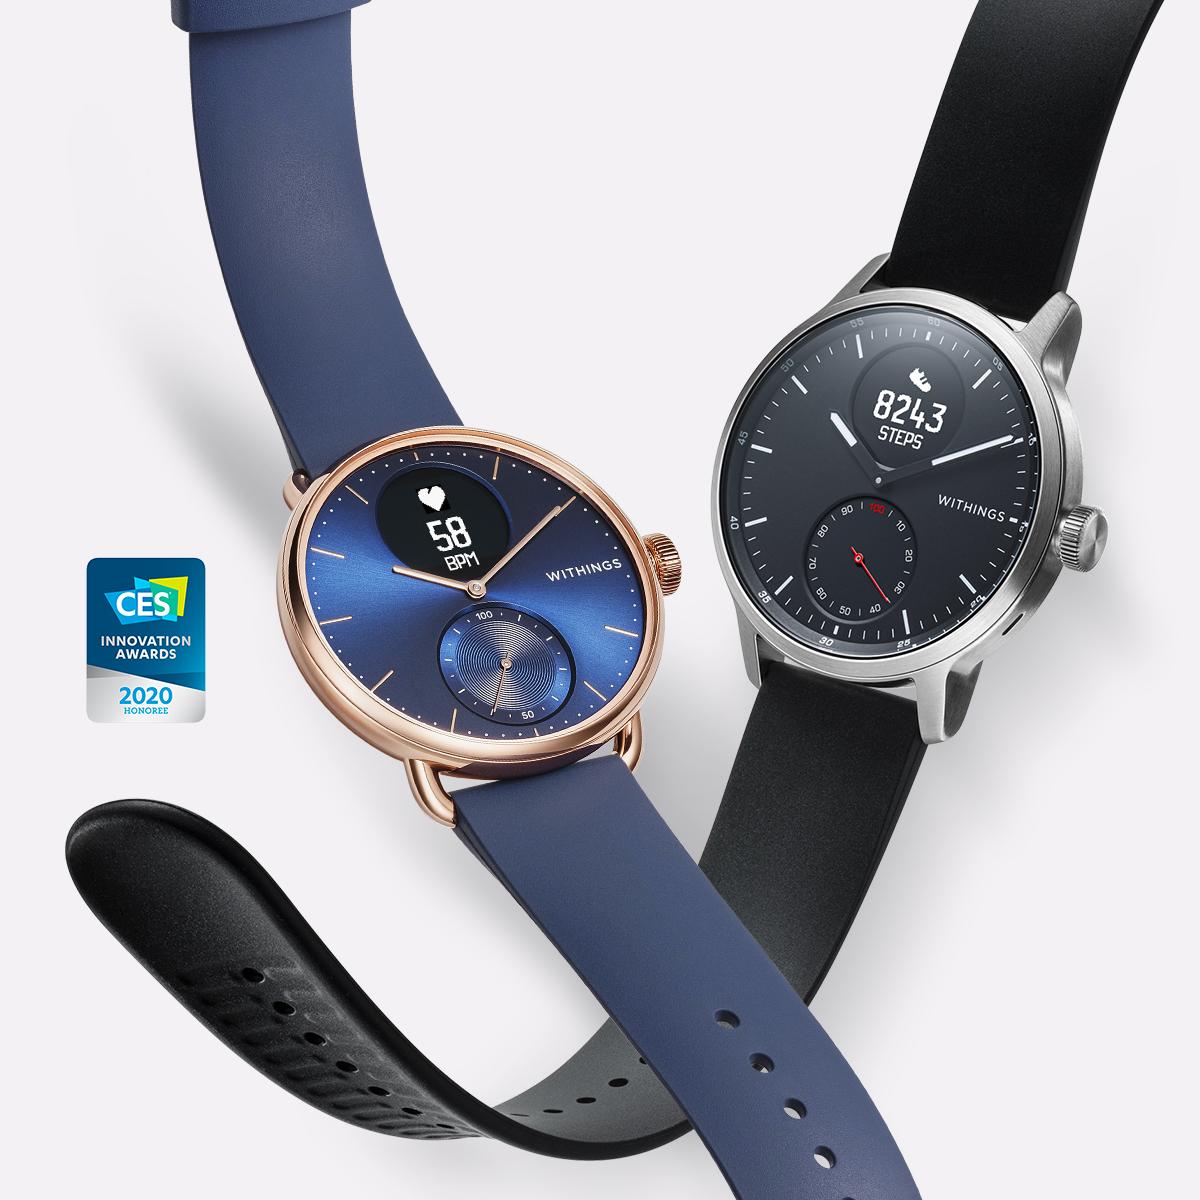 The world’s first analog watch with clinically validated ECG - ScanWatch | Withings